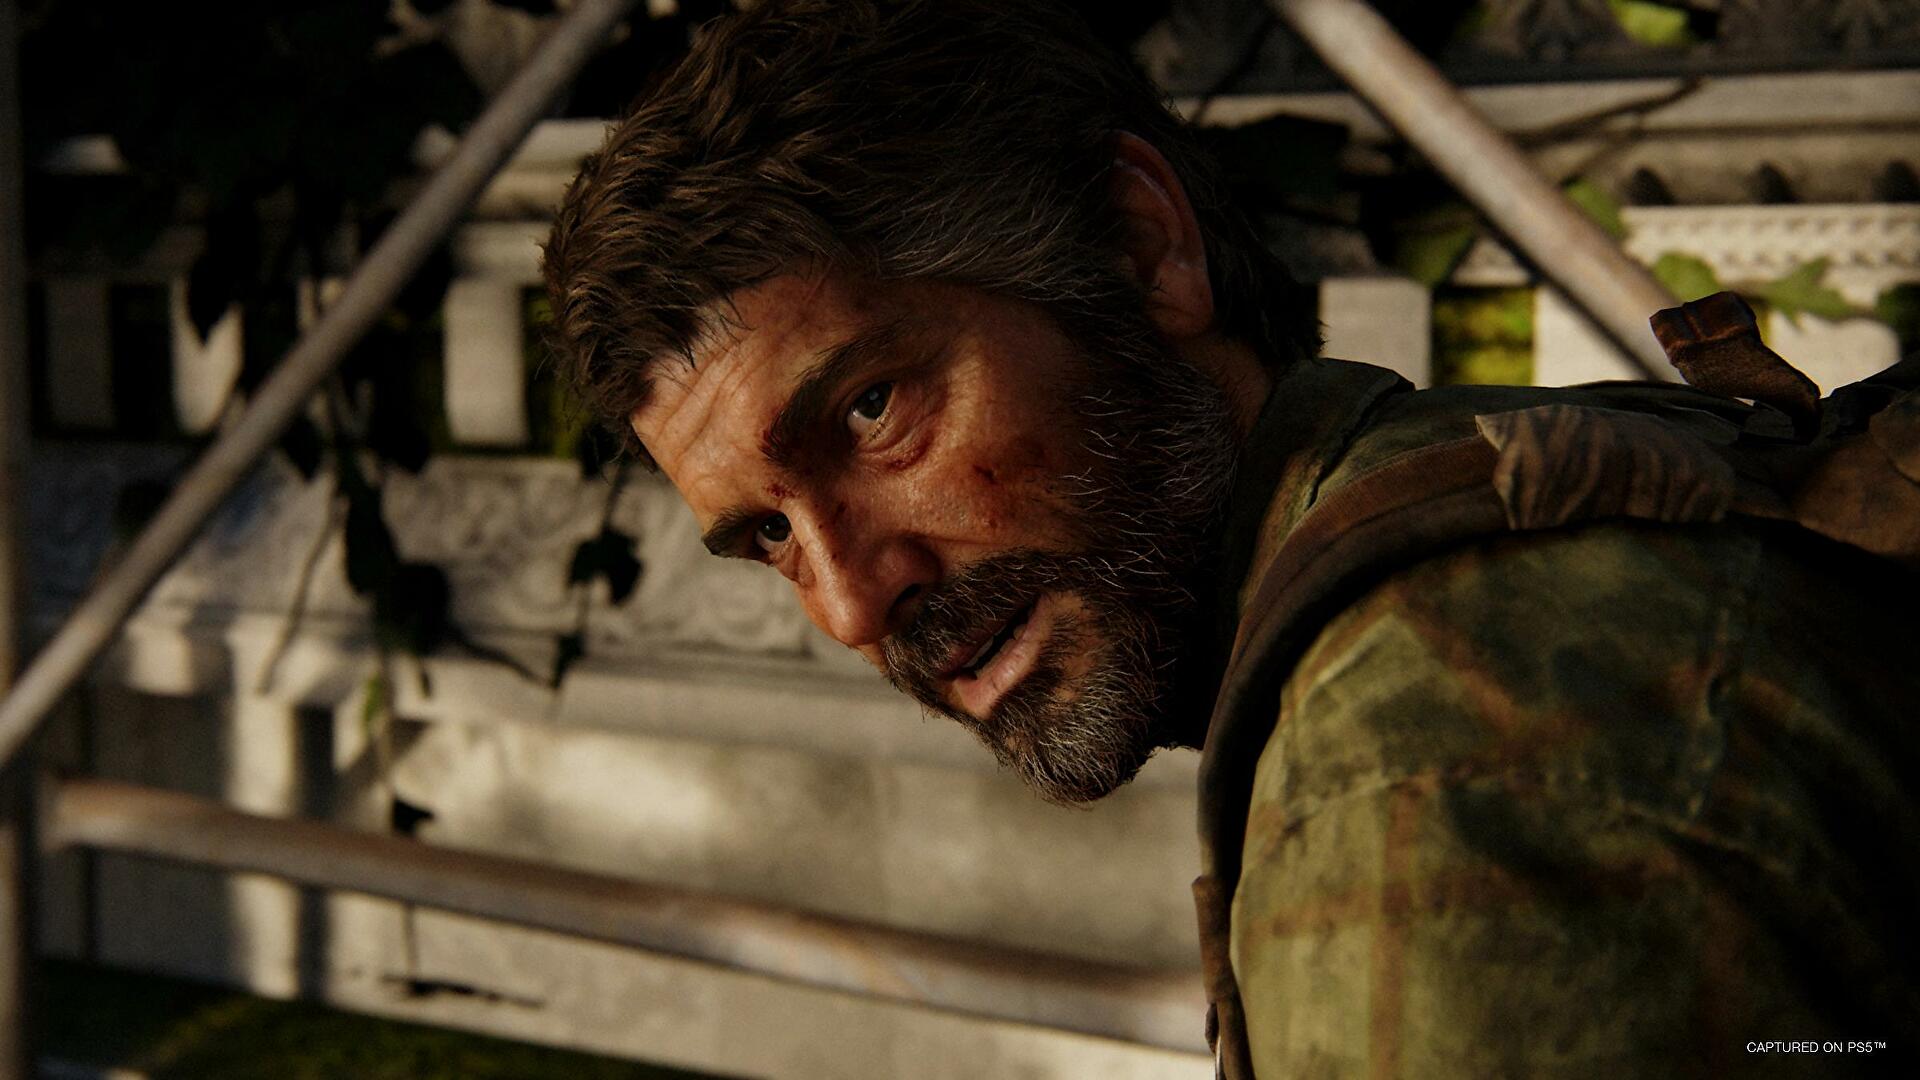 Naughty Dog Possibily Teasing Its Next IP In The Last Of Us Part 1 || Source: VG247